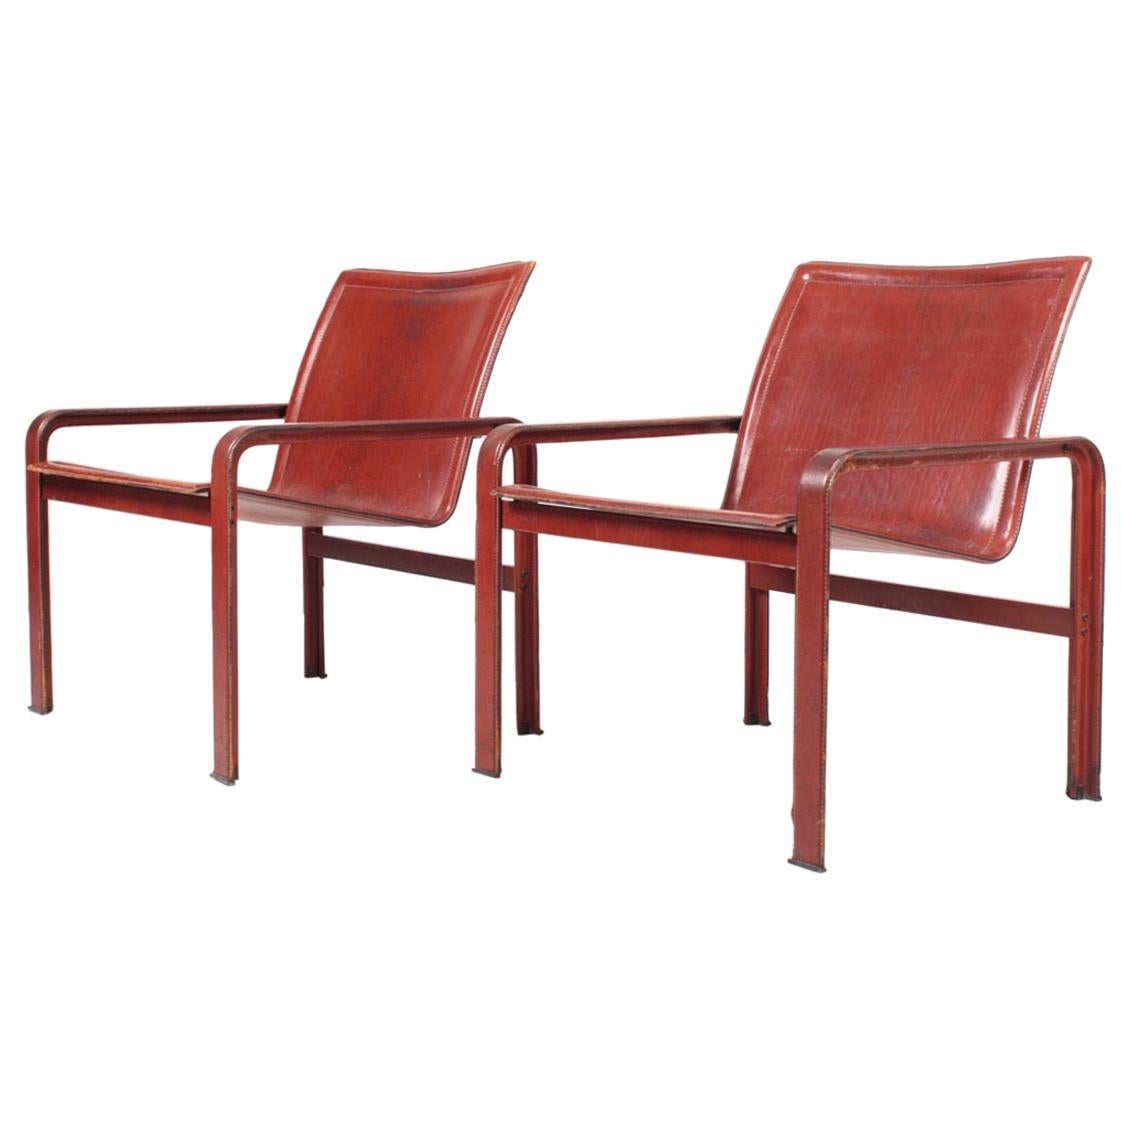 Pair of Lounge Chairs in Patinated Leather by Matteo Grassi, 1970s